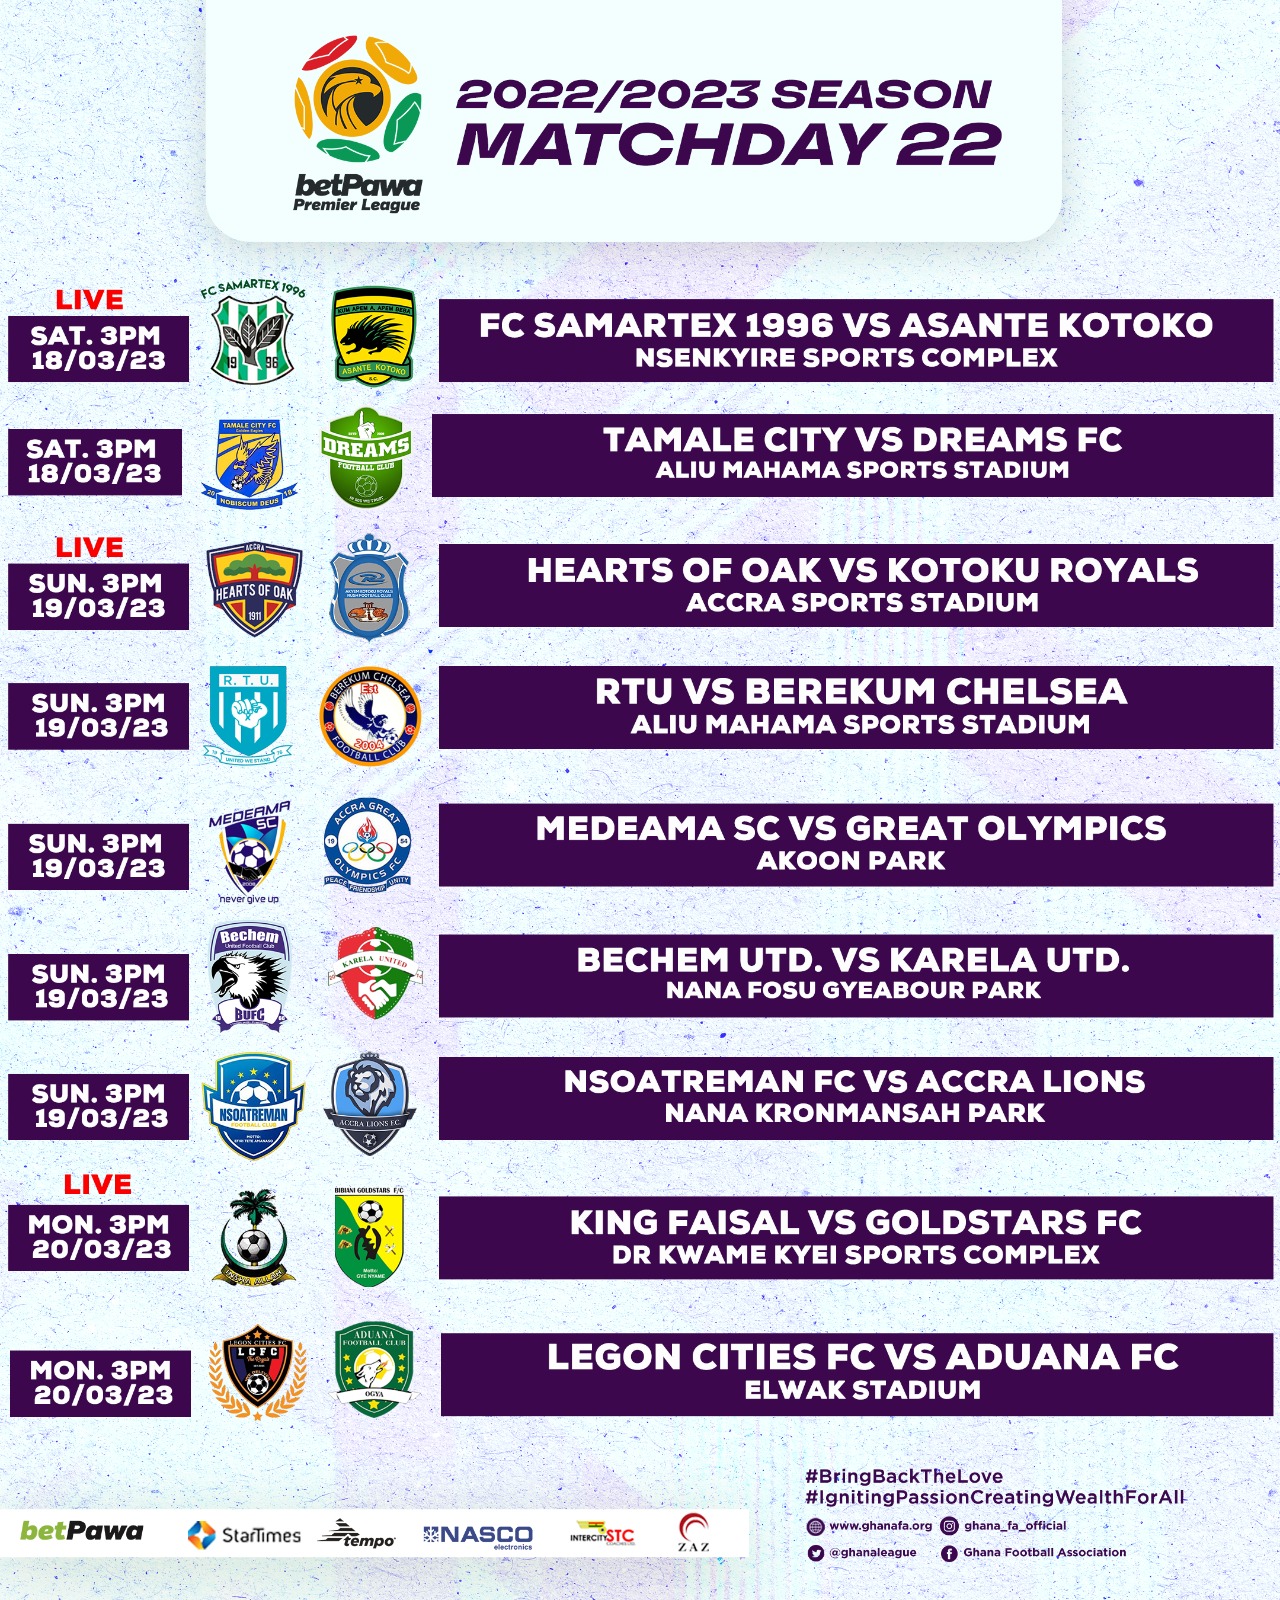 betPawa Premier League: Fixtures for Matchday 22 confirmed